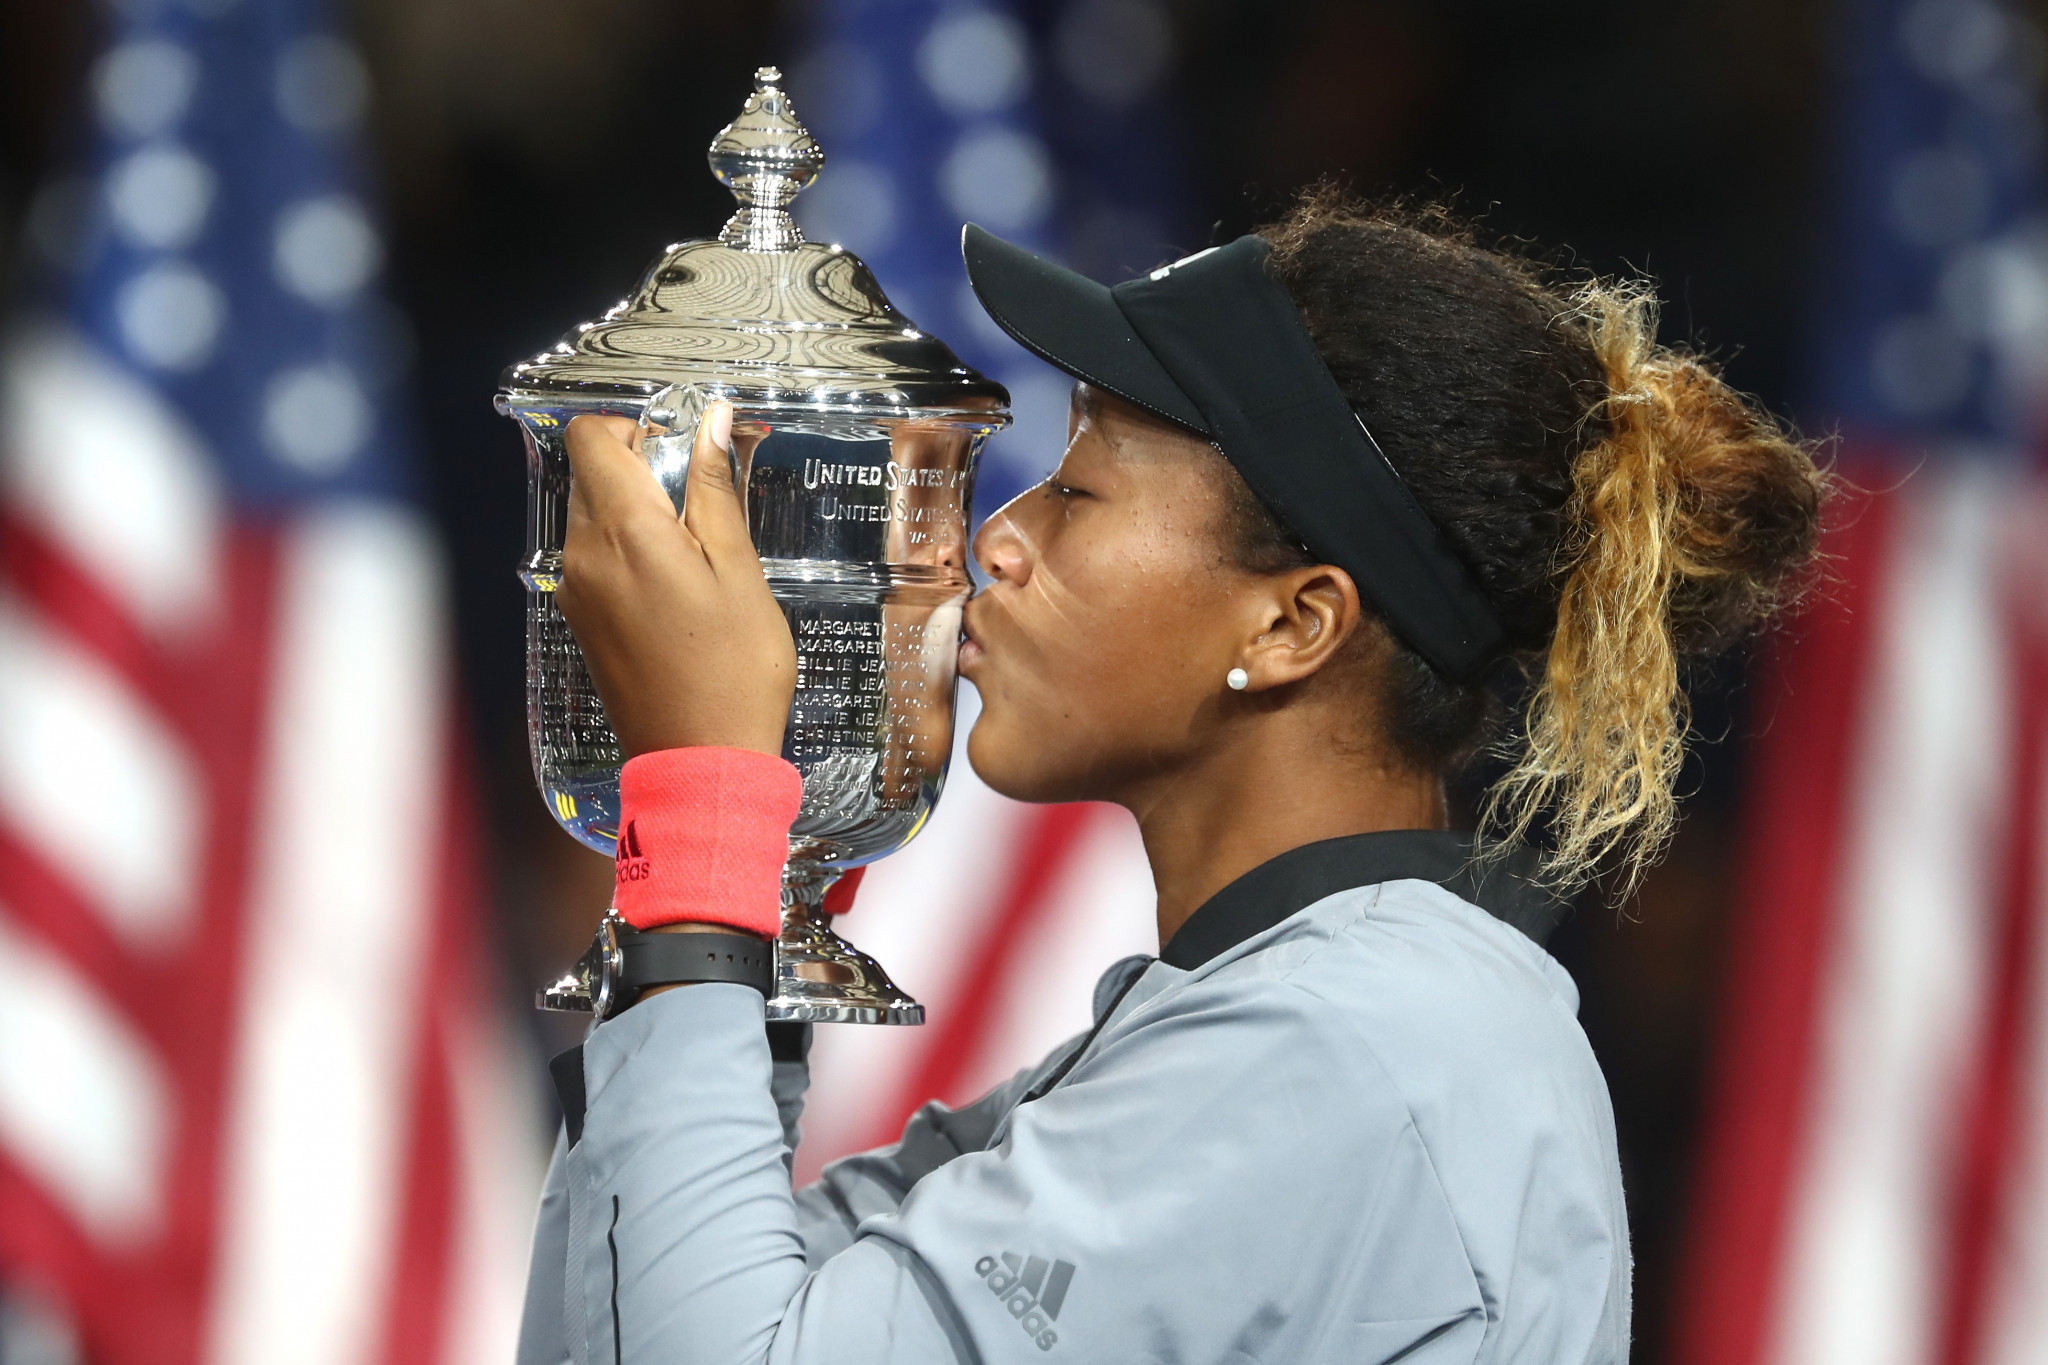 Naomi Osaka will play on home soil in Japan for the first time since winning the US Open this week, at the Toray Pan Pacific Open in Tokyo ©Getty Images